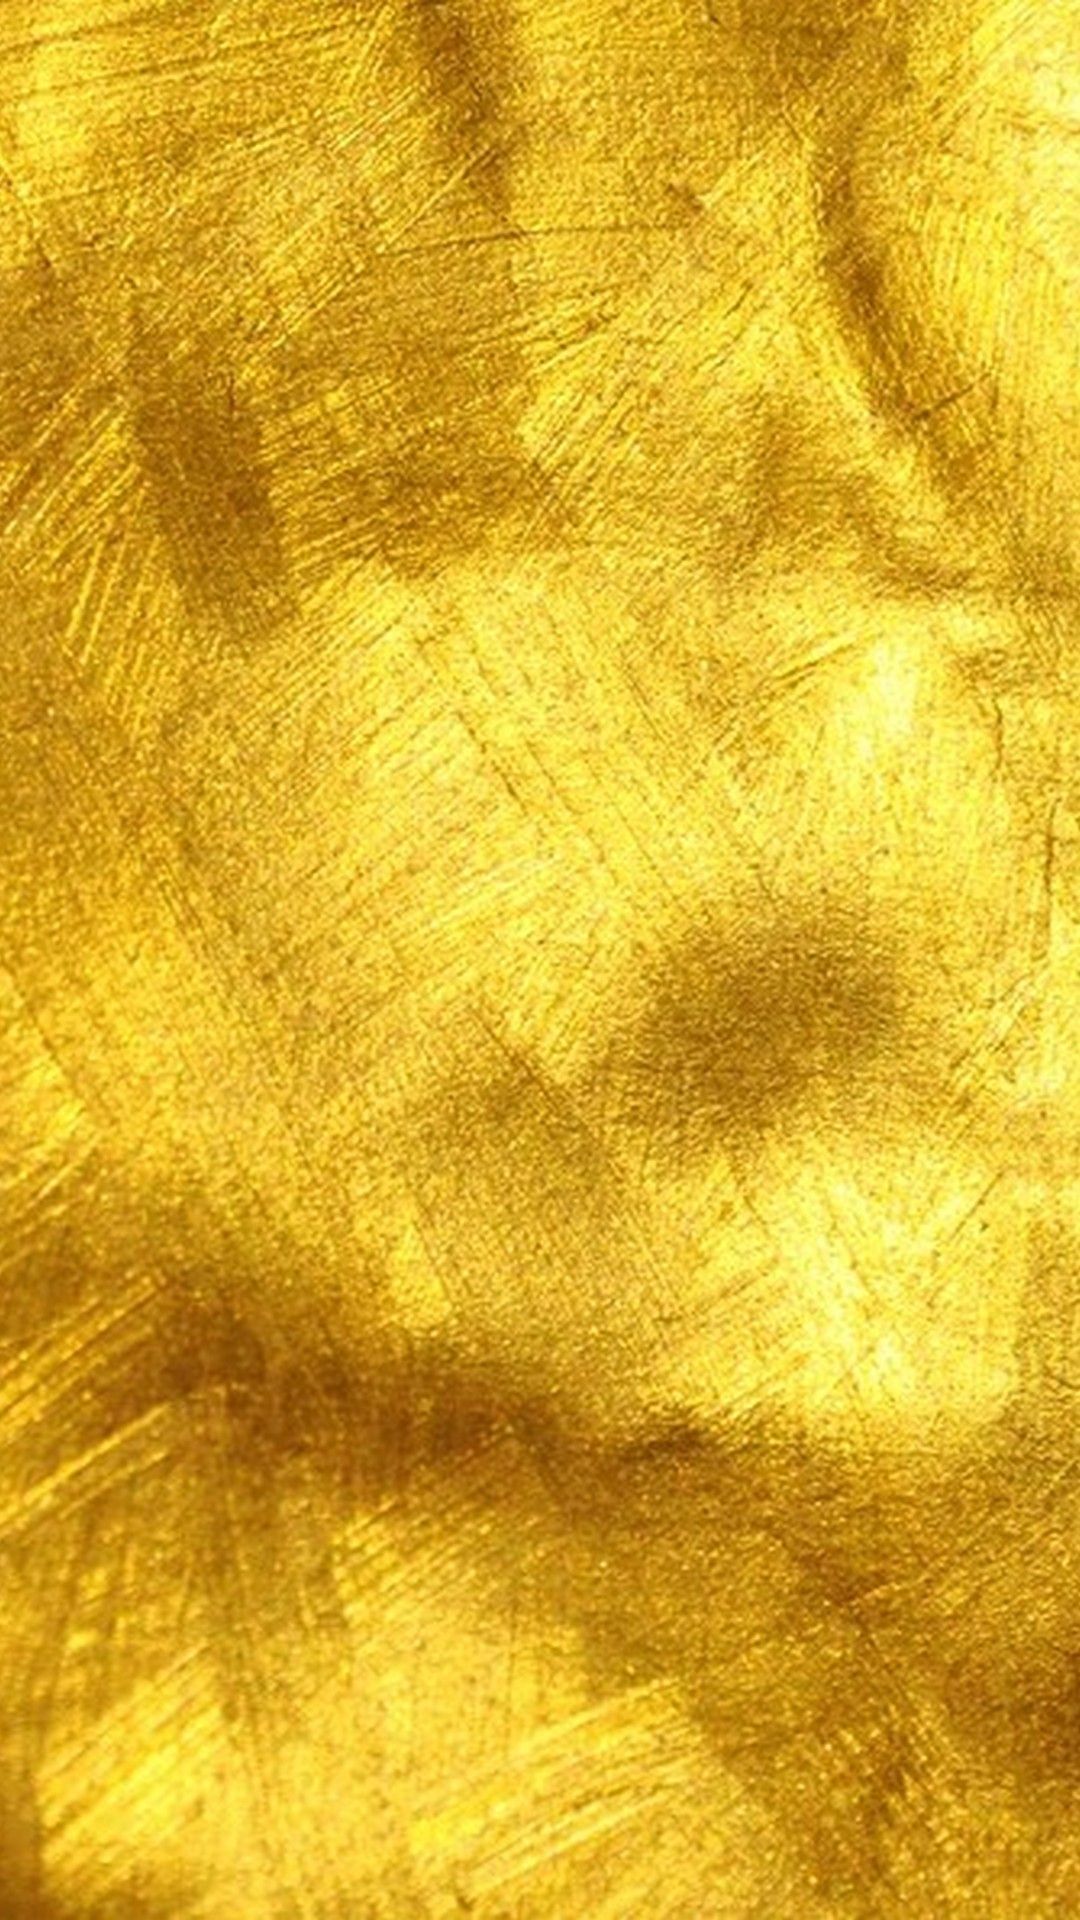 Android Wallpaper Golden. Android wallpaper, Yellow art, Metal